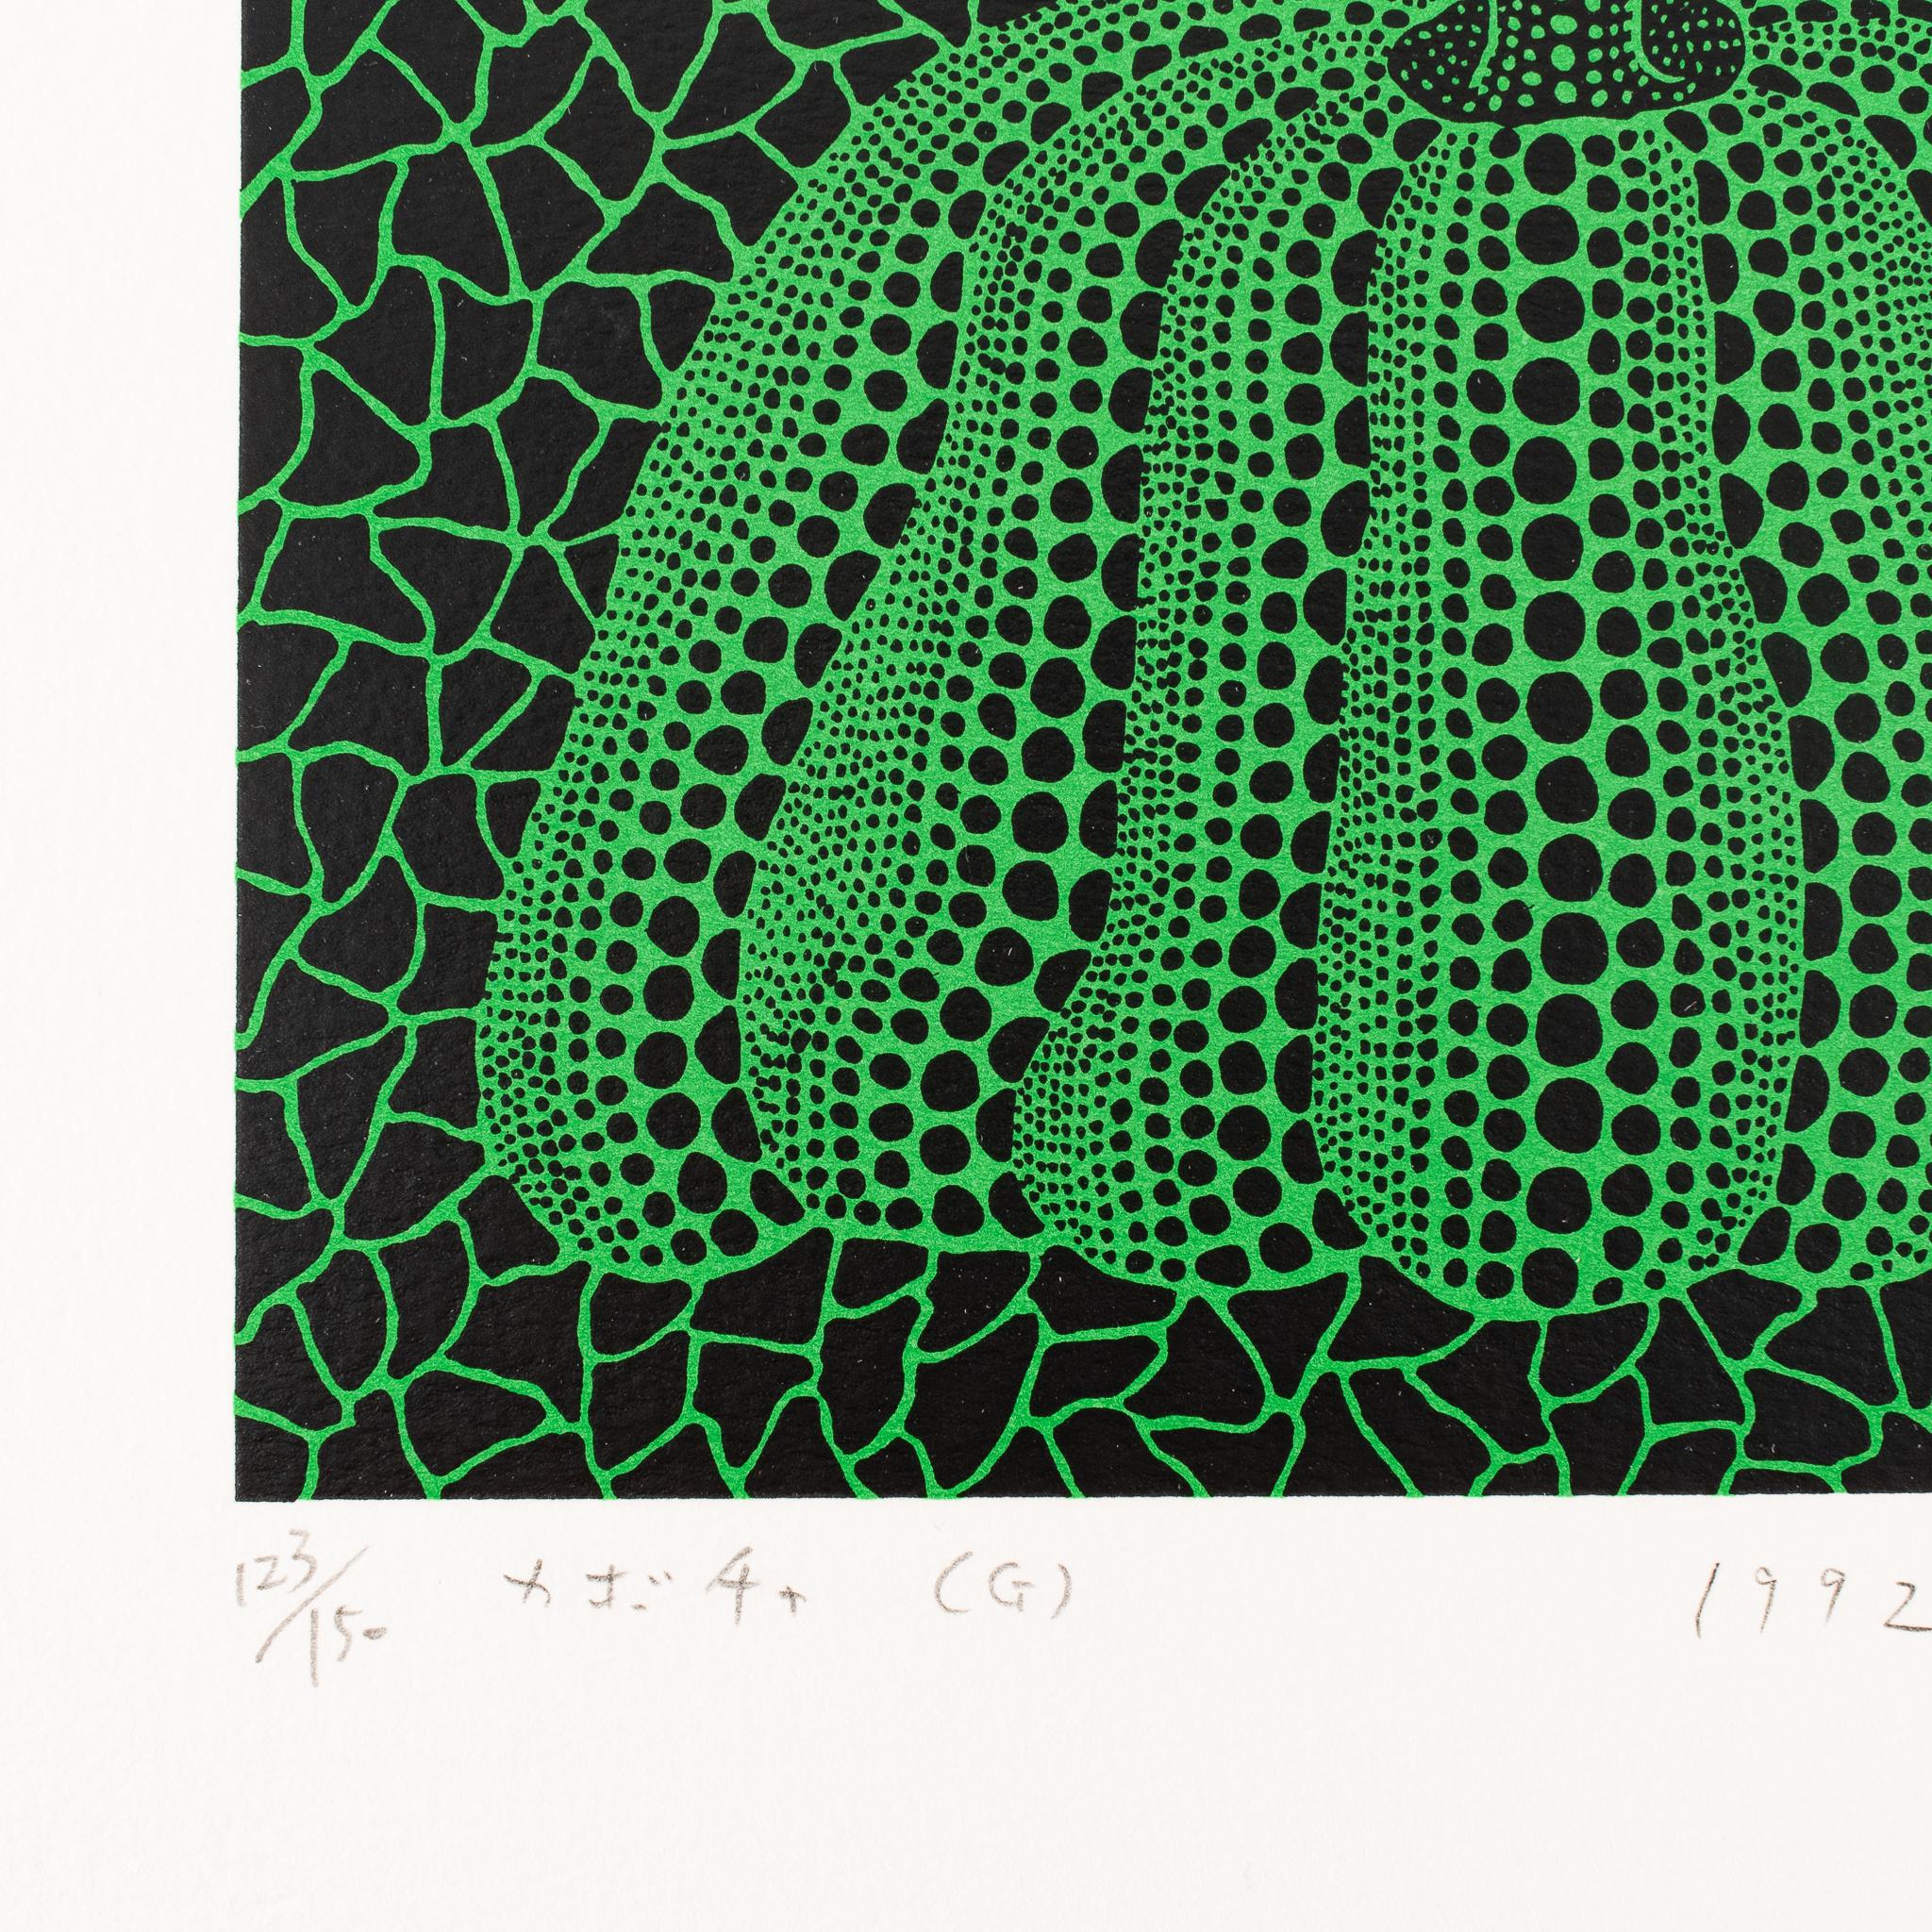 Screenprint
Edition of 150
28 x 37.3 cm (11 x 14.7 in)
Signed, numbered, dated and titled on the front
Pristine